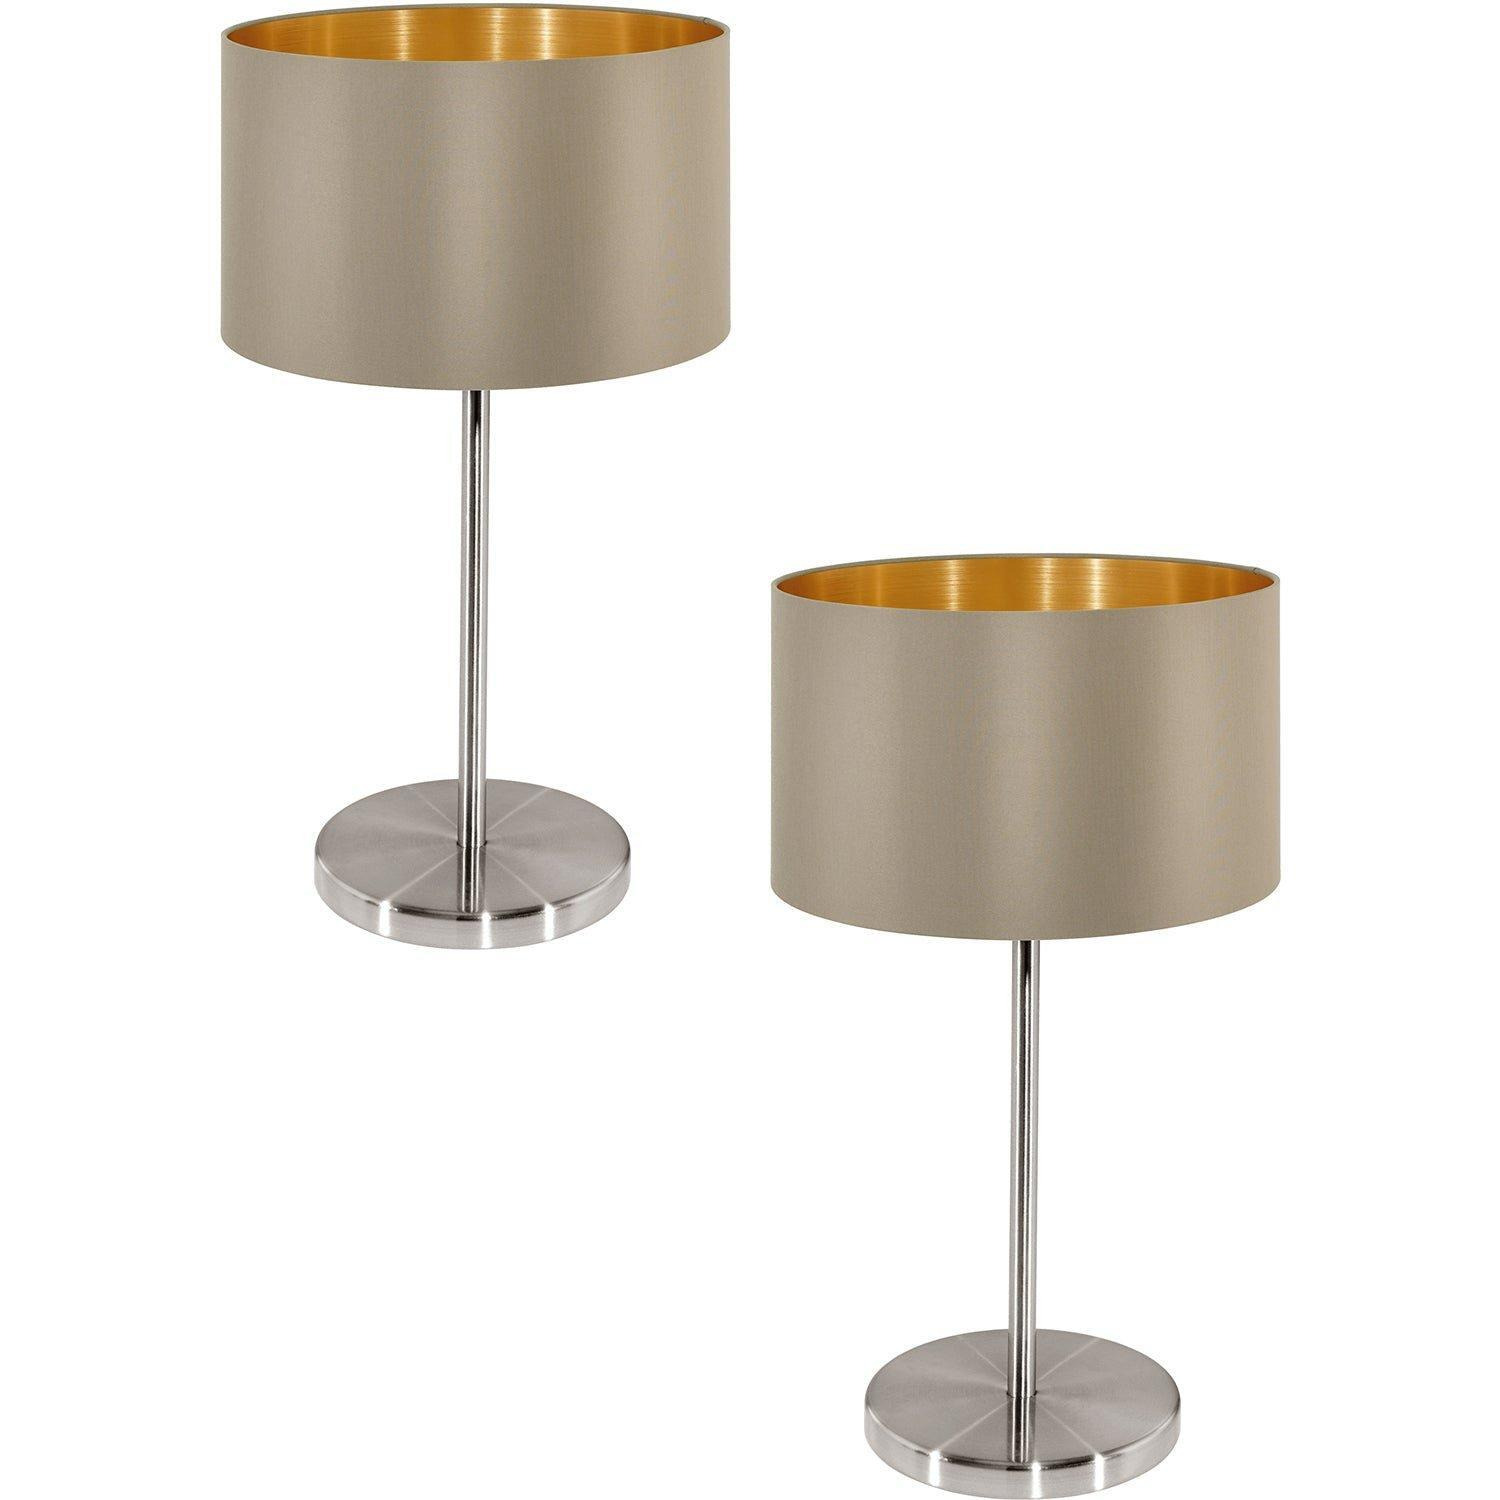 2 PACK Table Lamp Colour Satin Nickel Steel Shade Taupe Gold Fabric E27 1x60W - image 1